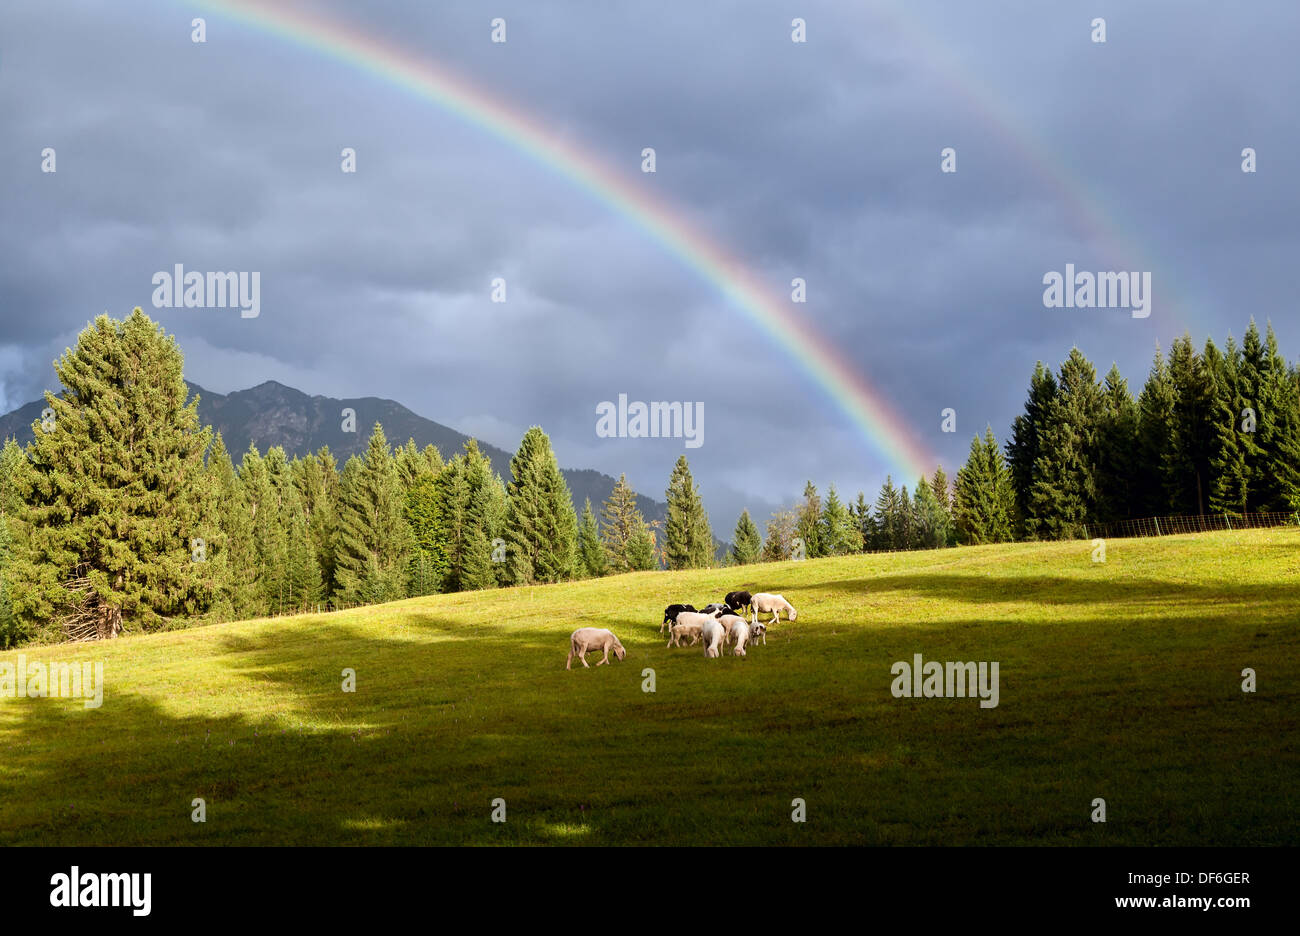 colorful rainbow over alpine pasture with sheep, Bavarian Alps, Germany Stock Photo